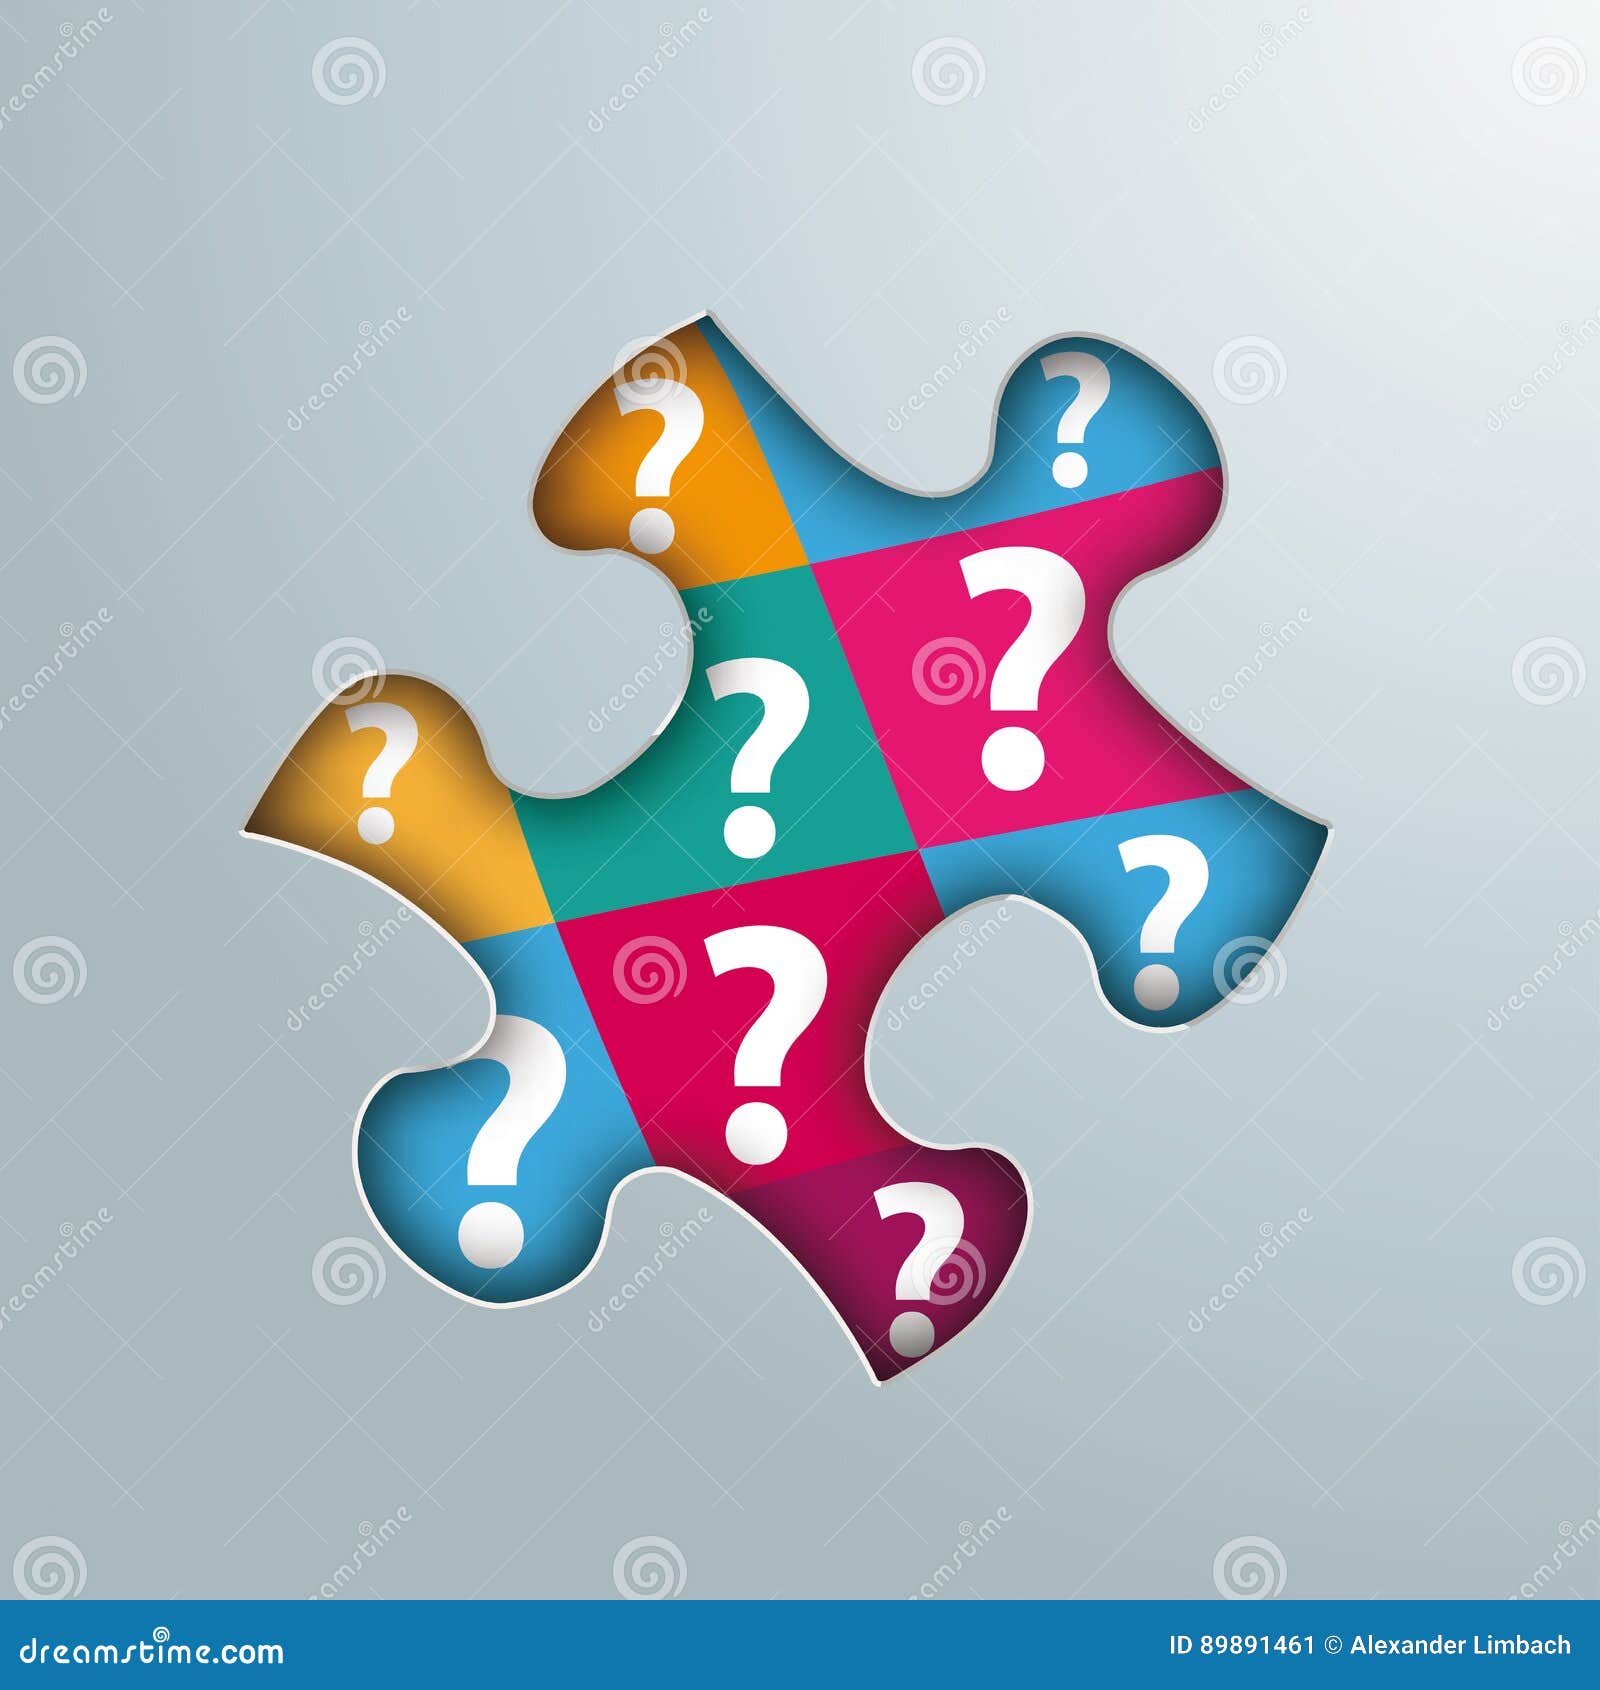 Puzzle Hole Questions stock vector. Illustration of hole - 89891461